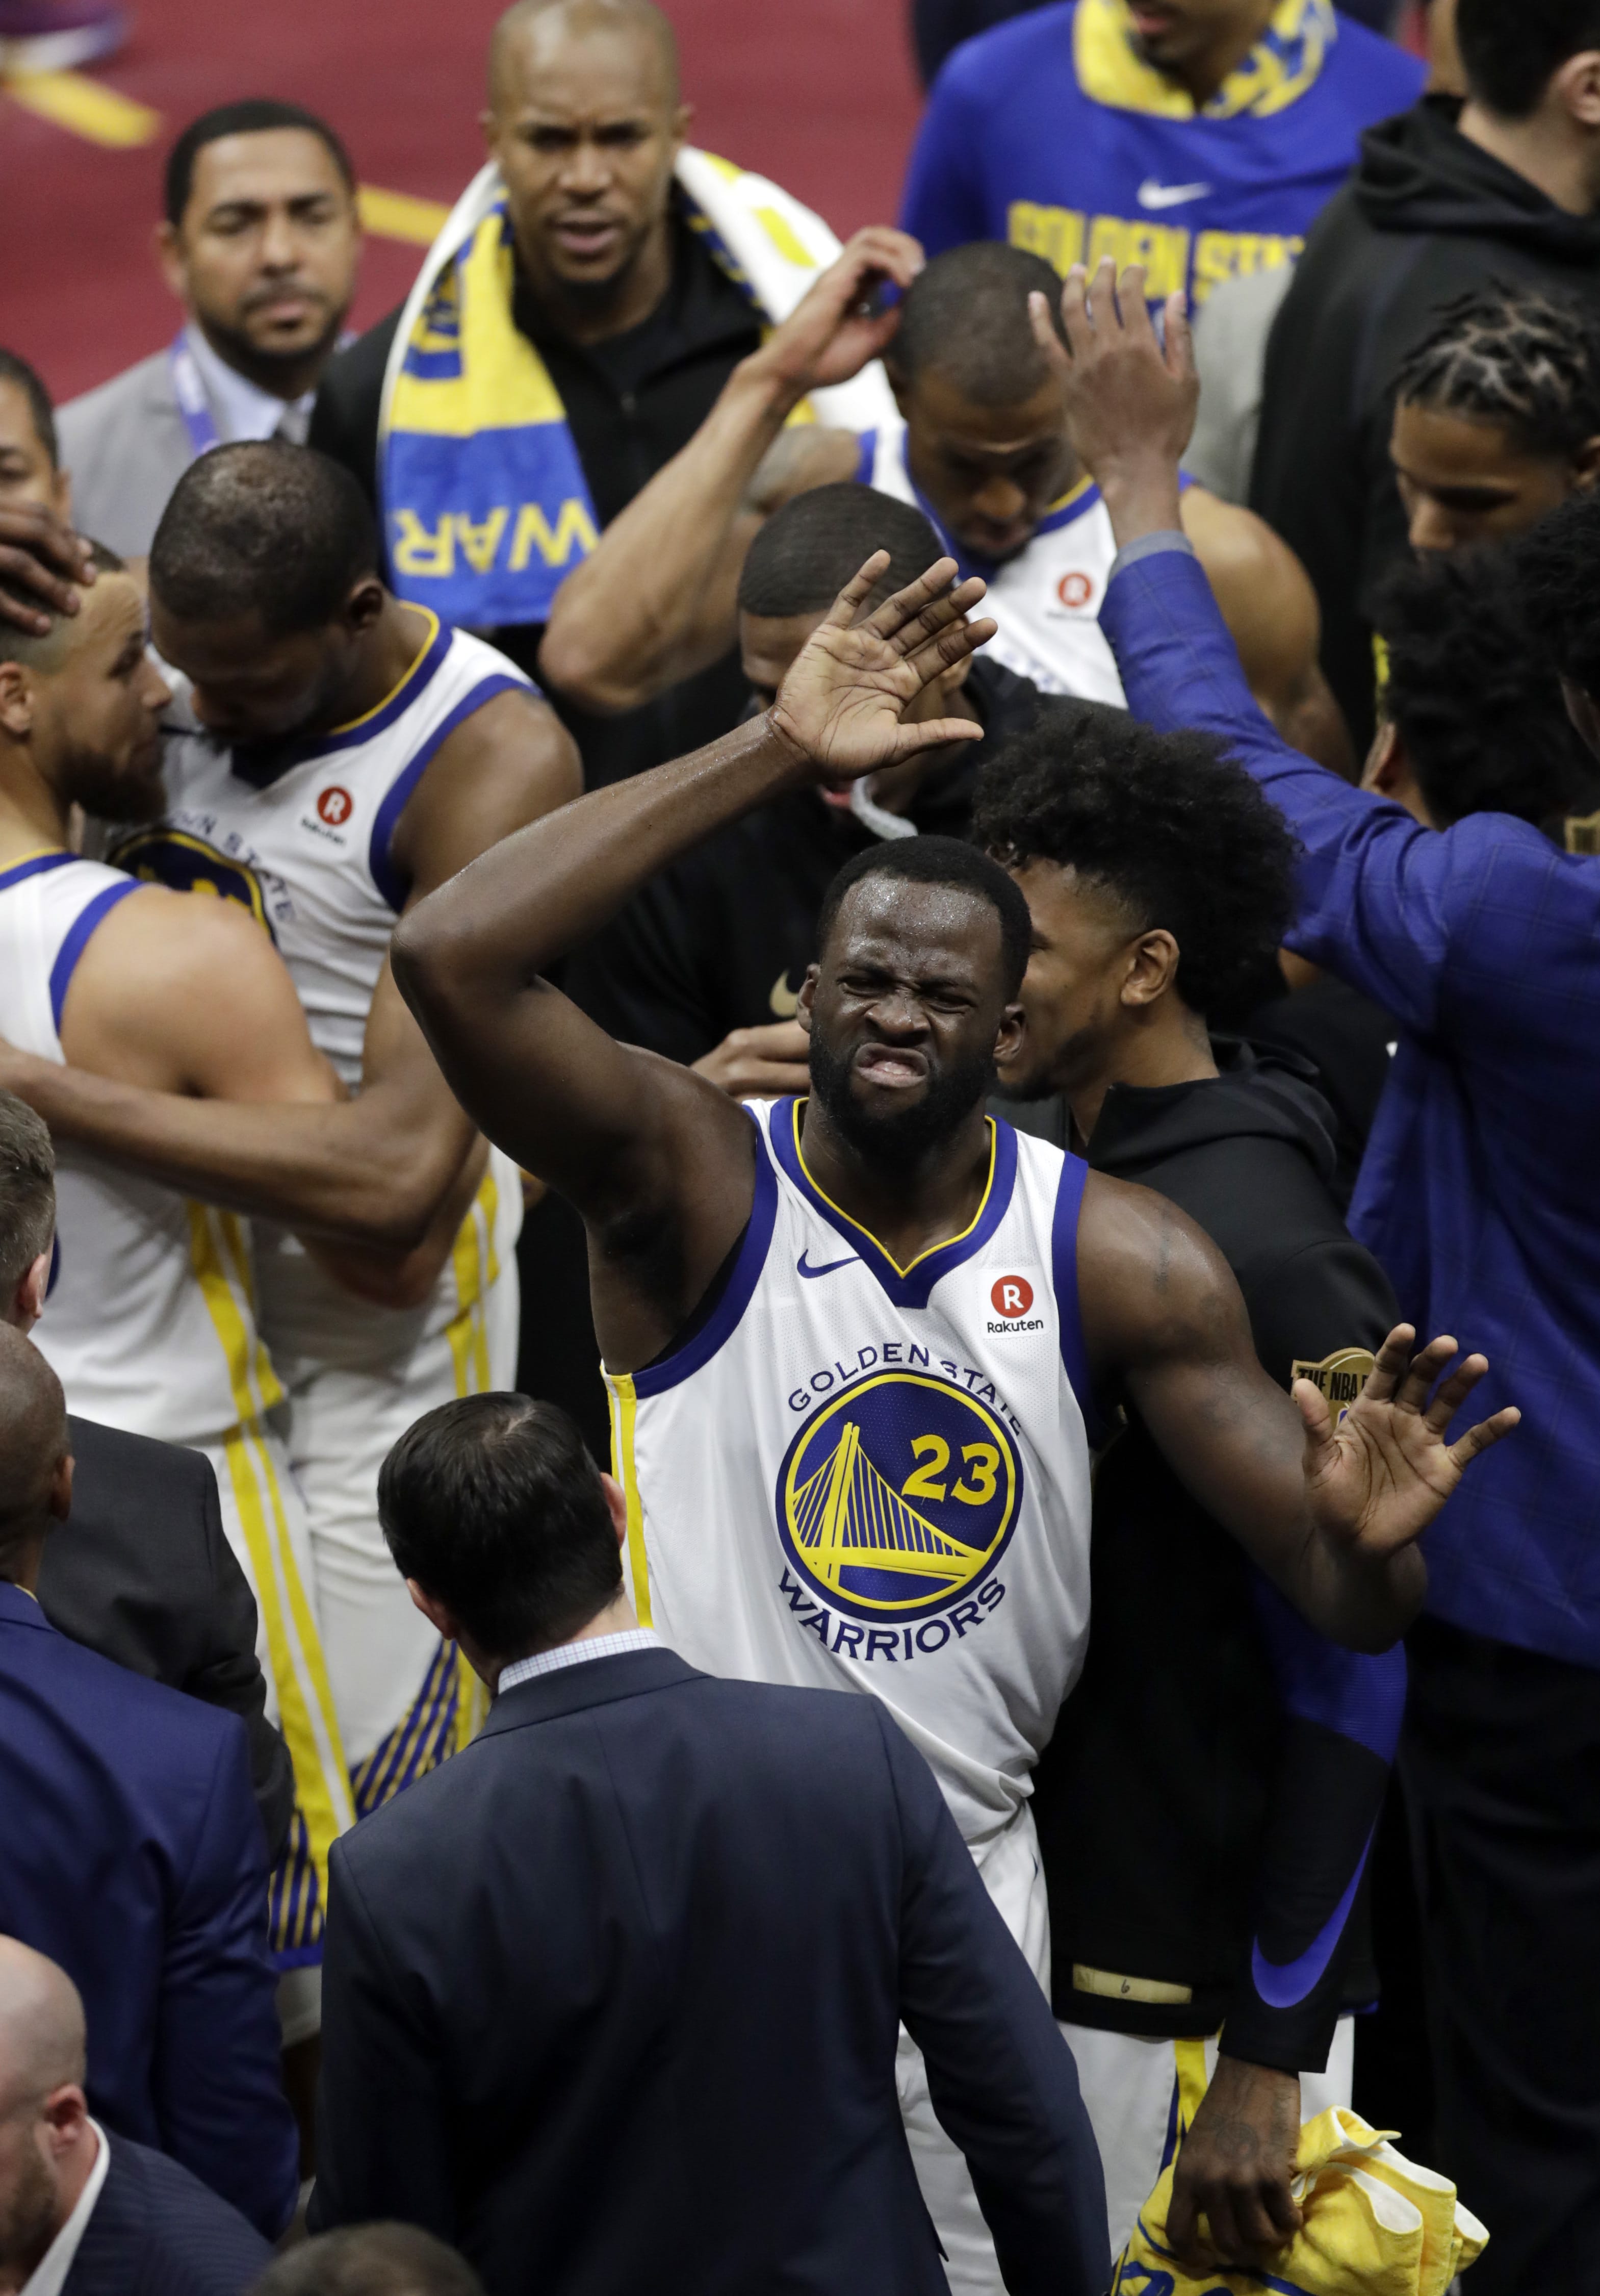 Golden State Warriors' Draymond Green celebrates after Game 3 of basketball's NBA Finals, Wednesday against the Cleveland Cavaliers, June 6, 2018, in Cleveland. The Warriors defeated the Cavaliers 110-102 to take a 3-0 lead in the series.